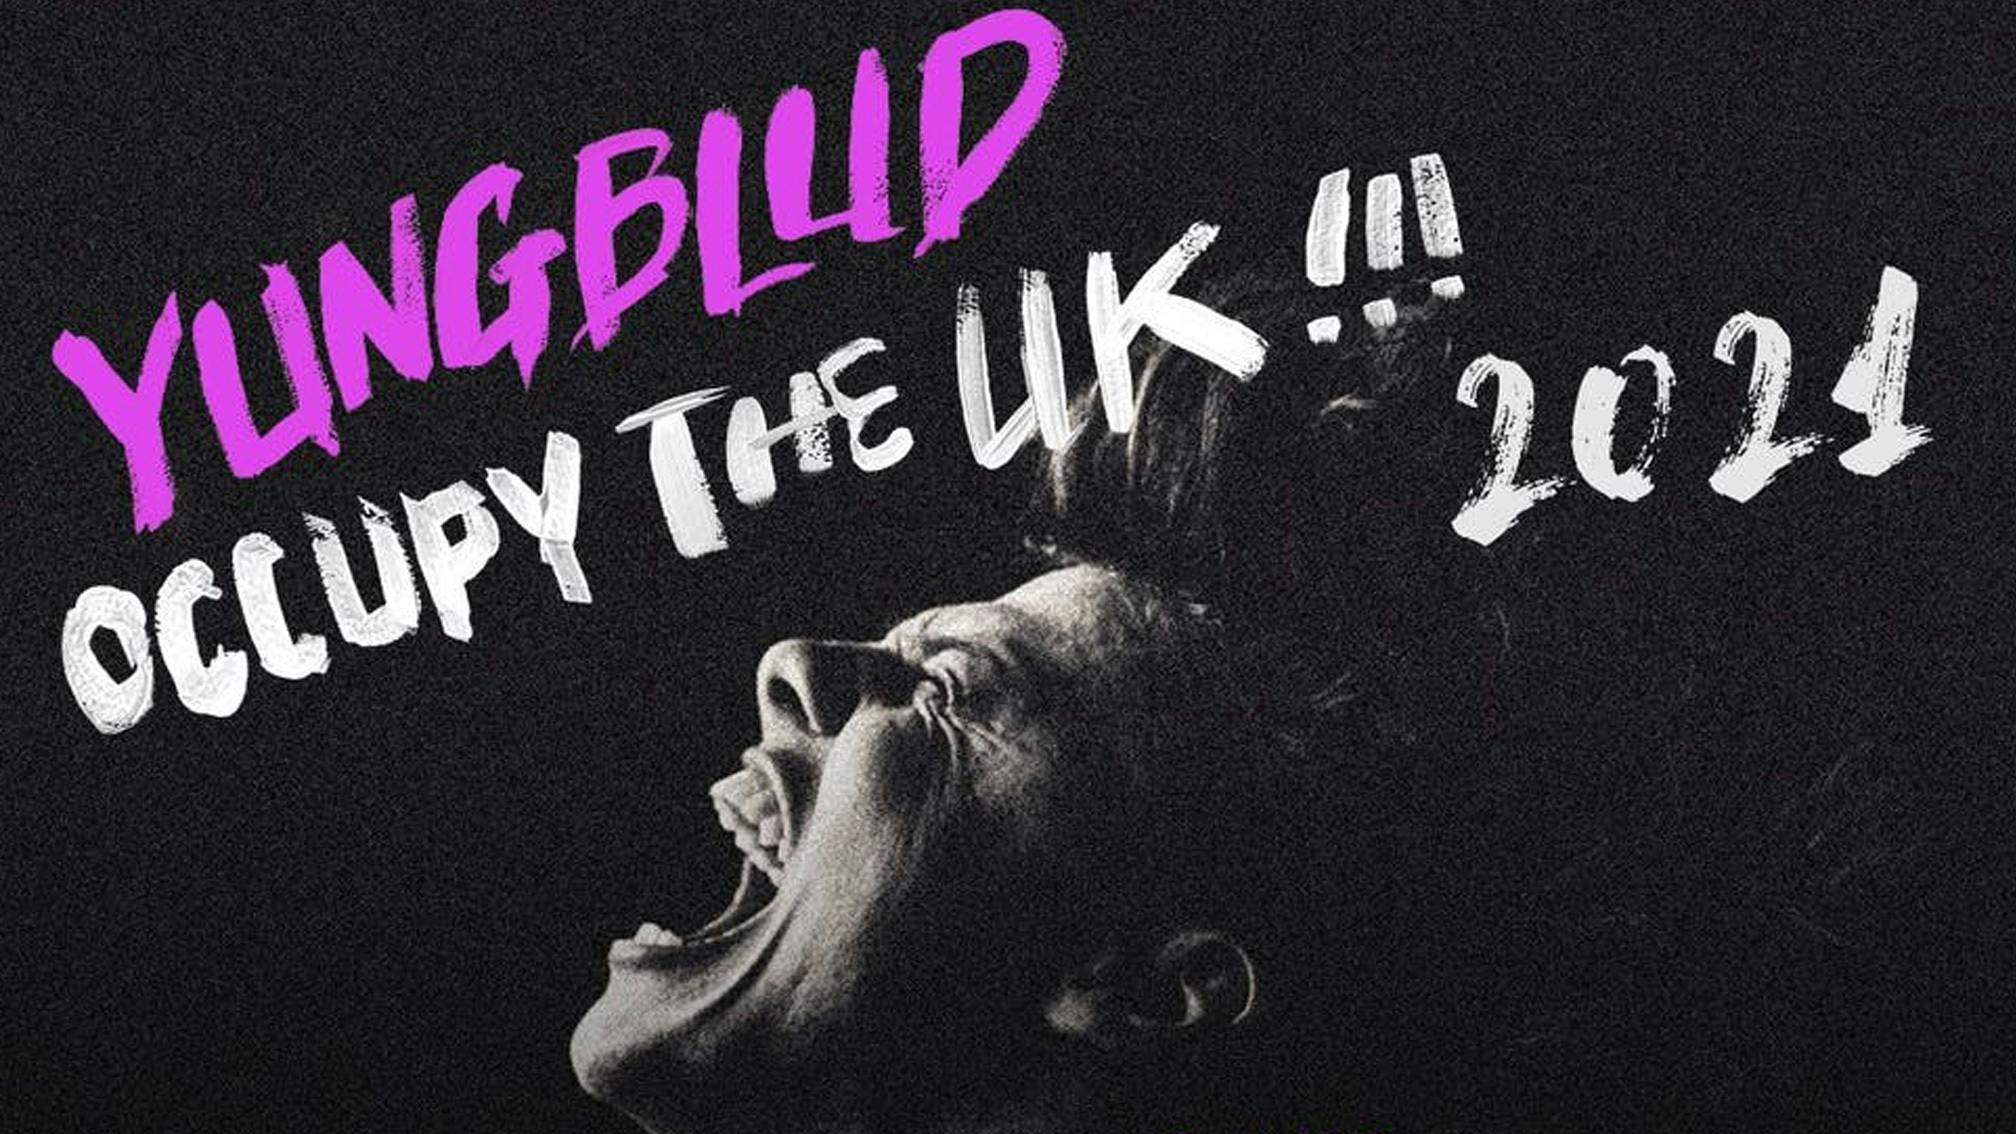 YUNGBLUD has announced that the Occupy The UK tour in March has been postponed